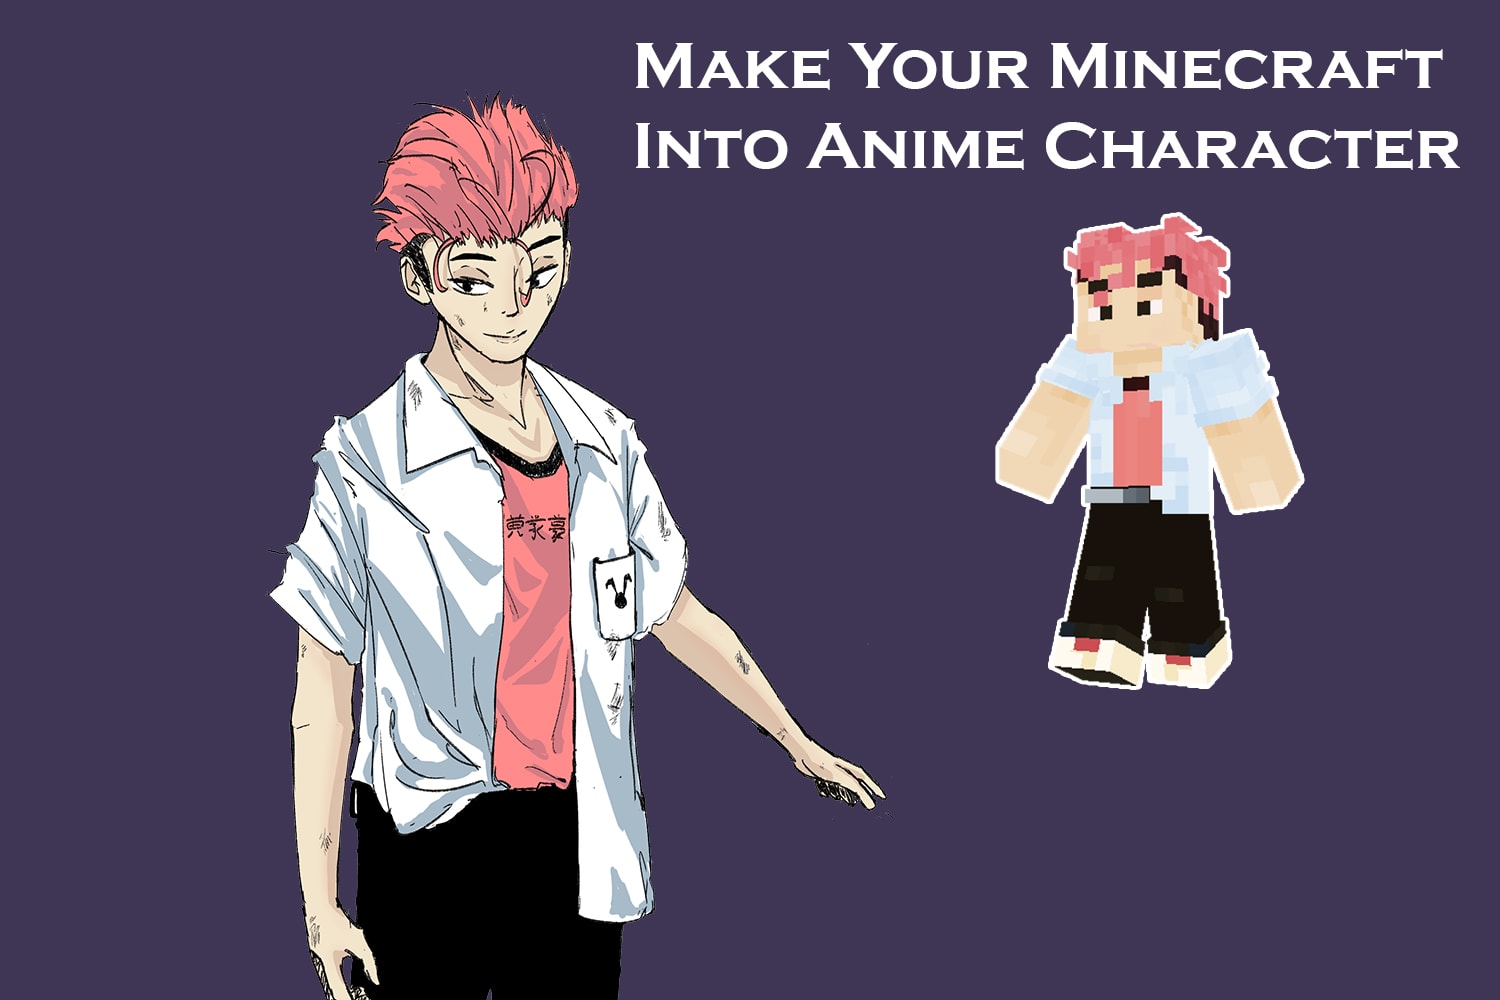 Draw your minecraft skin, roblox avatar into anime style by ...